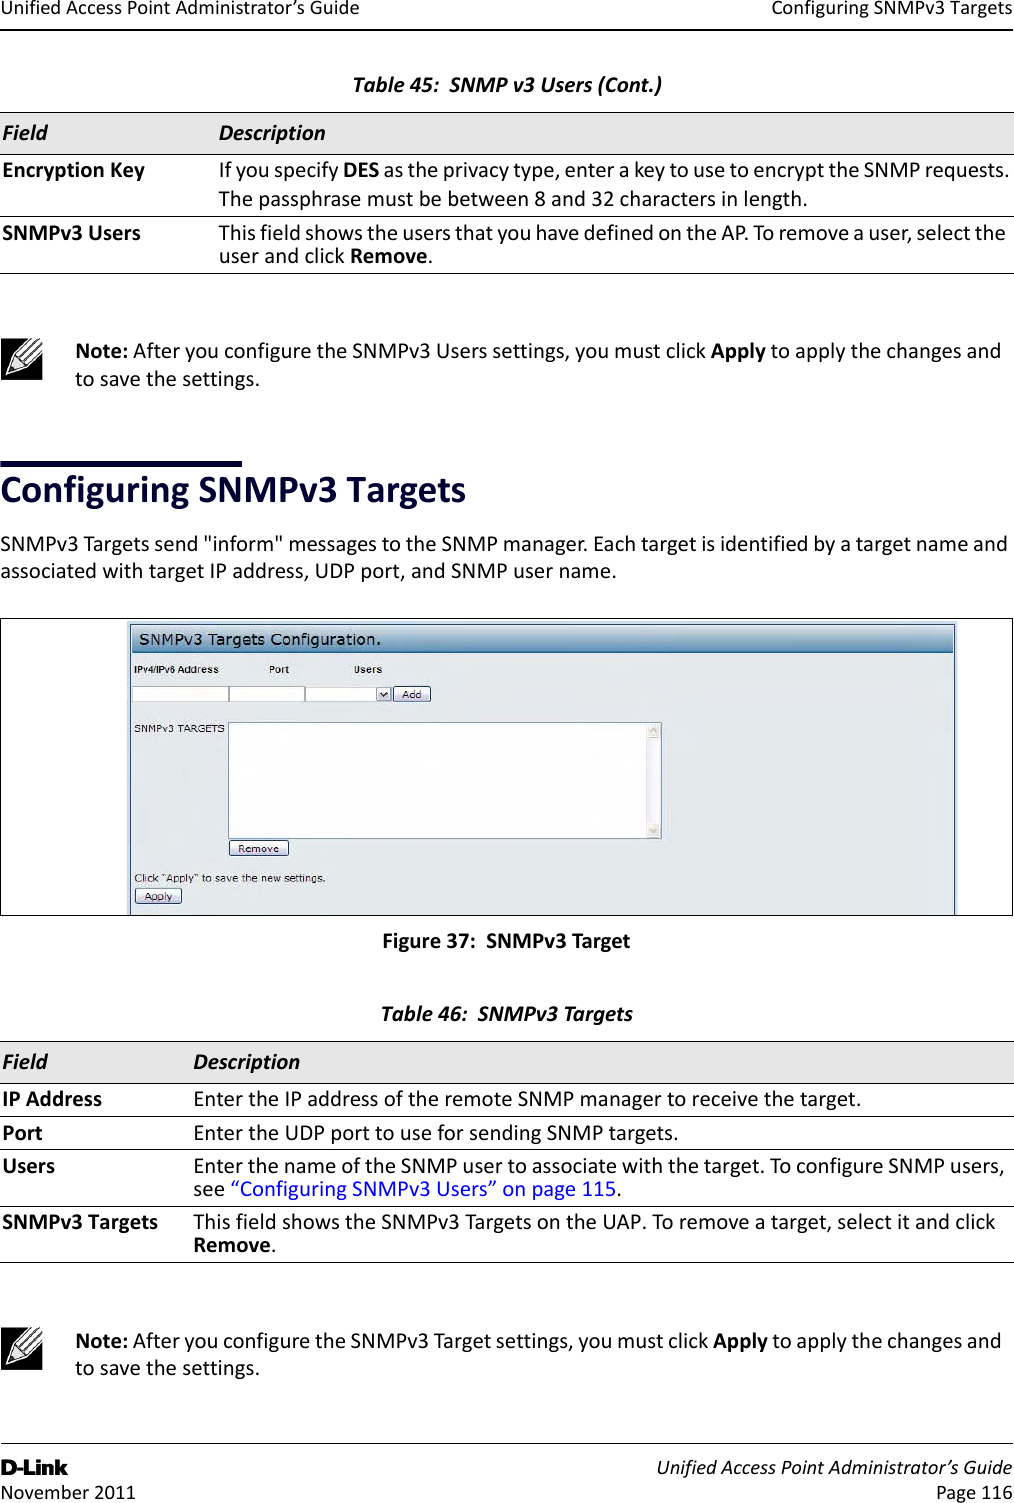 ConfiguringSNMPv3TargetsD-Link UnifiedAccessPointAdministrator’sGuide November2011 Page116UnifiedAccessPointAdministrator’sGuideConfiguringSNMPv3TargetsSNMPv3Targetssend&quot;inform&quot;messagestotheSNMPmanager.EachtargetisidentifiedbyatargetnameandassociatedwithtargetIPaddress,UDPport,andSNMPusername.Figure37:SNMPv3TargetEncryptionKey IfyouspecifyDESastheprivacytype,enterakeytousetoencrypttheSNMPrequests.Thepassphrasemustbebetween8and32charactersinlength.SNMPv3Users ThisfieldshowstheusersthatyouhavedefinedontheAP.Toremoveauser,selecttheuserandclickRemove.Note:AfteryouconfiguretheSNMPv3Userssettings,youmustclickApplytoapplythechangesandtosavethesettings.Table46:SNMPv3TargetsField DescriptionIPAddress EntertheIPaddressoftheremoteSNMPmanagertoreceivethetarget.Port EntertheUDPporttouseforsendingSNMPtargets.Users EnterthenameoftheSNMPusertoassociatewiththetarget.ToconfigureSNMPusers,see“ConfiguringSNMPv3Users”onpage115.SNMPv3Targets ThisfieldshowstheSNMPv3TargetsontheUAP.Toremoveatarget,selectitandclickRemove.Note:AfteryouconfiguretheSNMPv3Targetsettings,youmustclickApplytoapplythechangesandtosavethesettings.Table45:SNMPv3Users(Cont.)Field Description